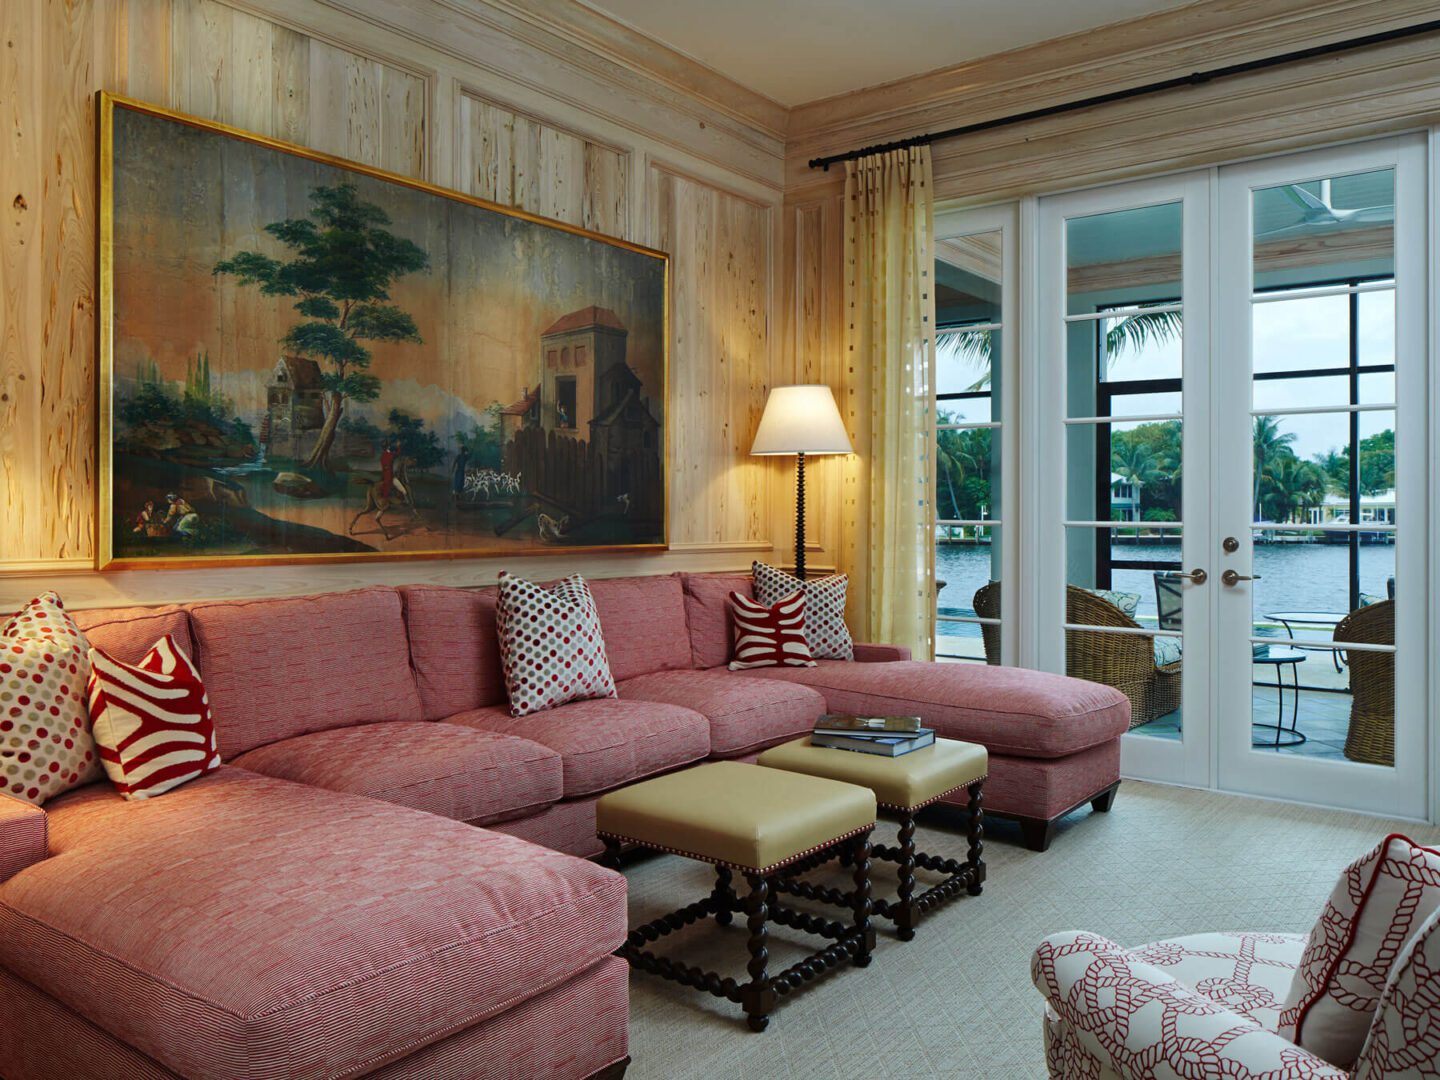 A living room with pink couches and a painting on the wall.